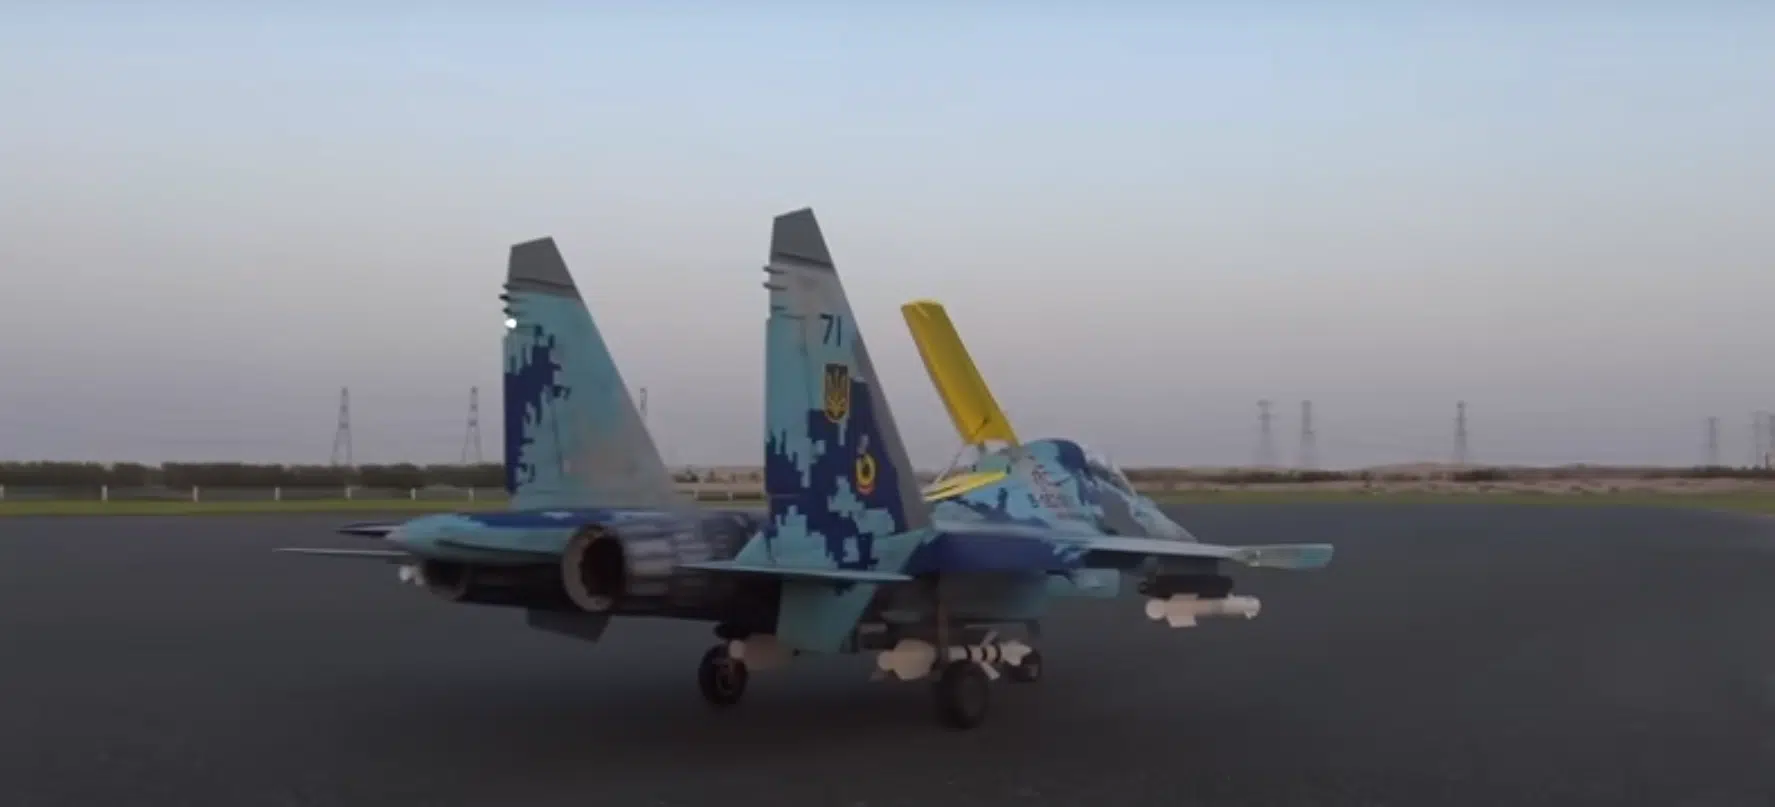 WATCH: These miniature replica fighter jets fly at 500 kilometers per hour